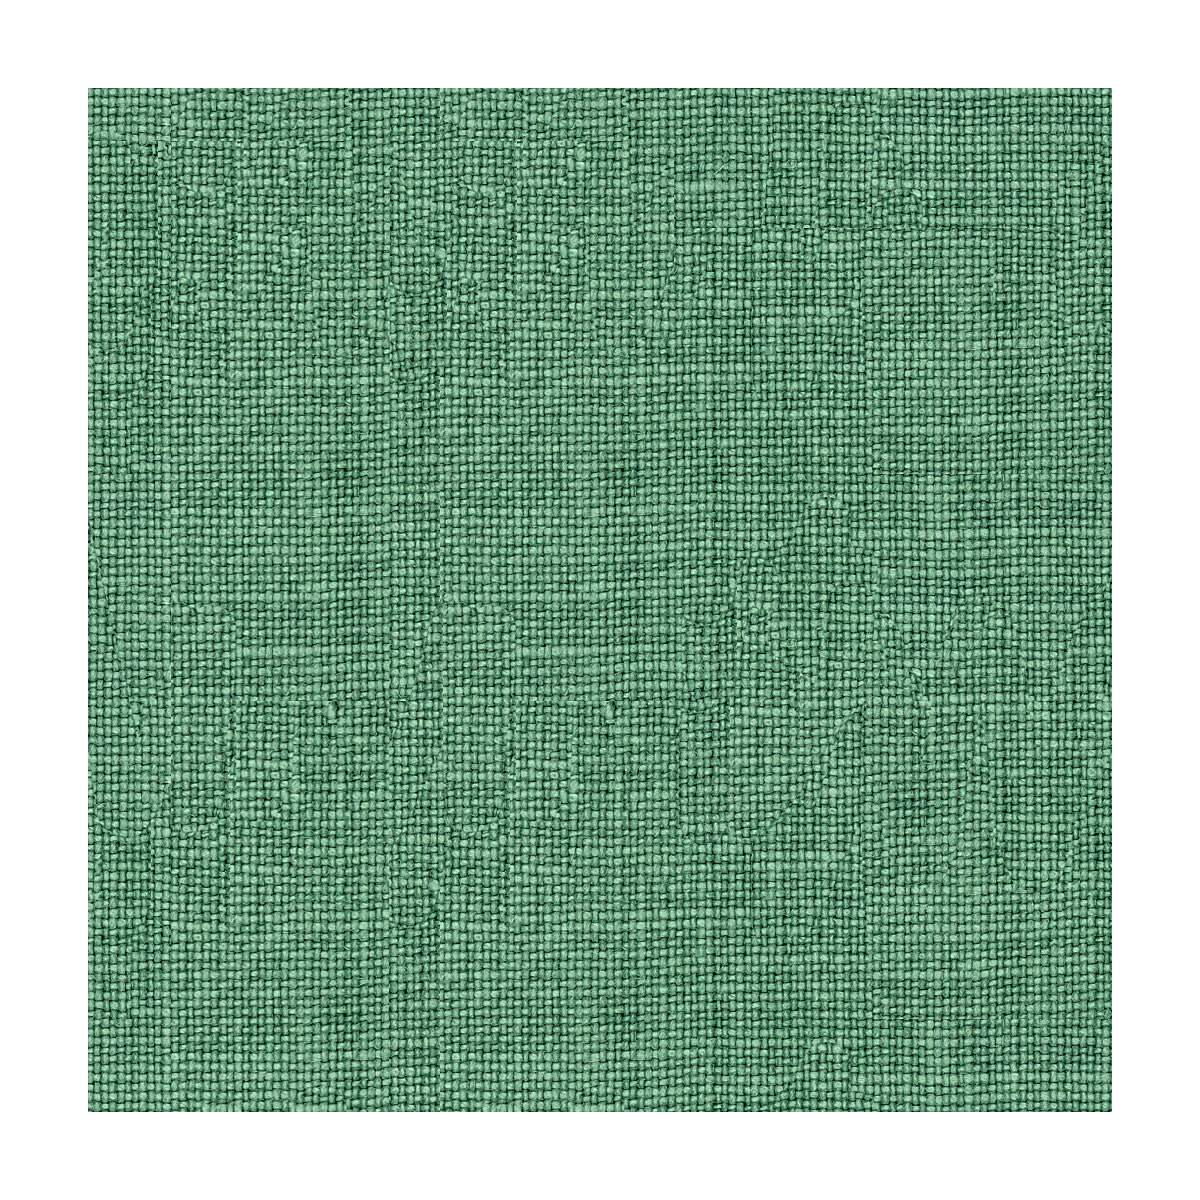 Kravet Basics fabric in 33767-13 color - pattern 33767.13.0 - by Kravet Basics in the Perfect Plains collection